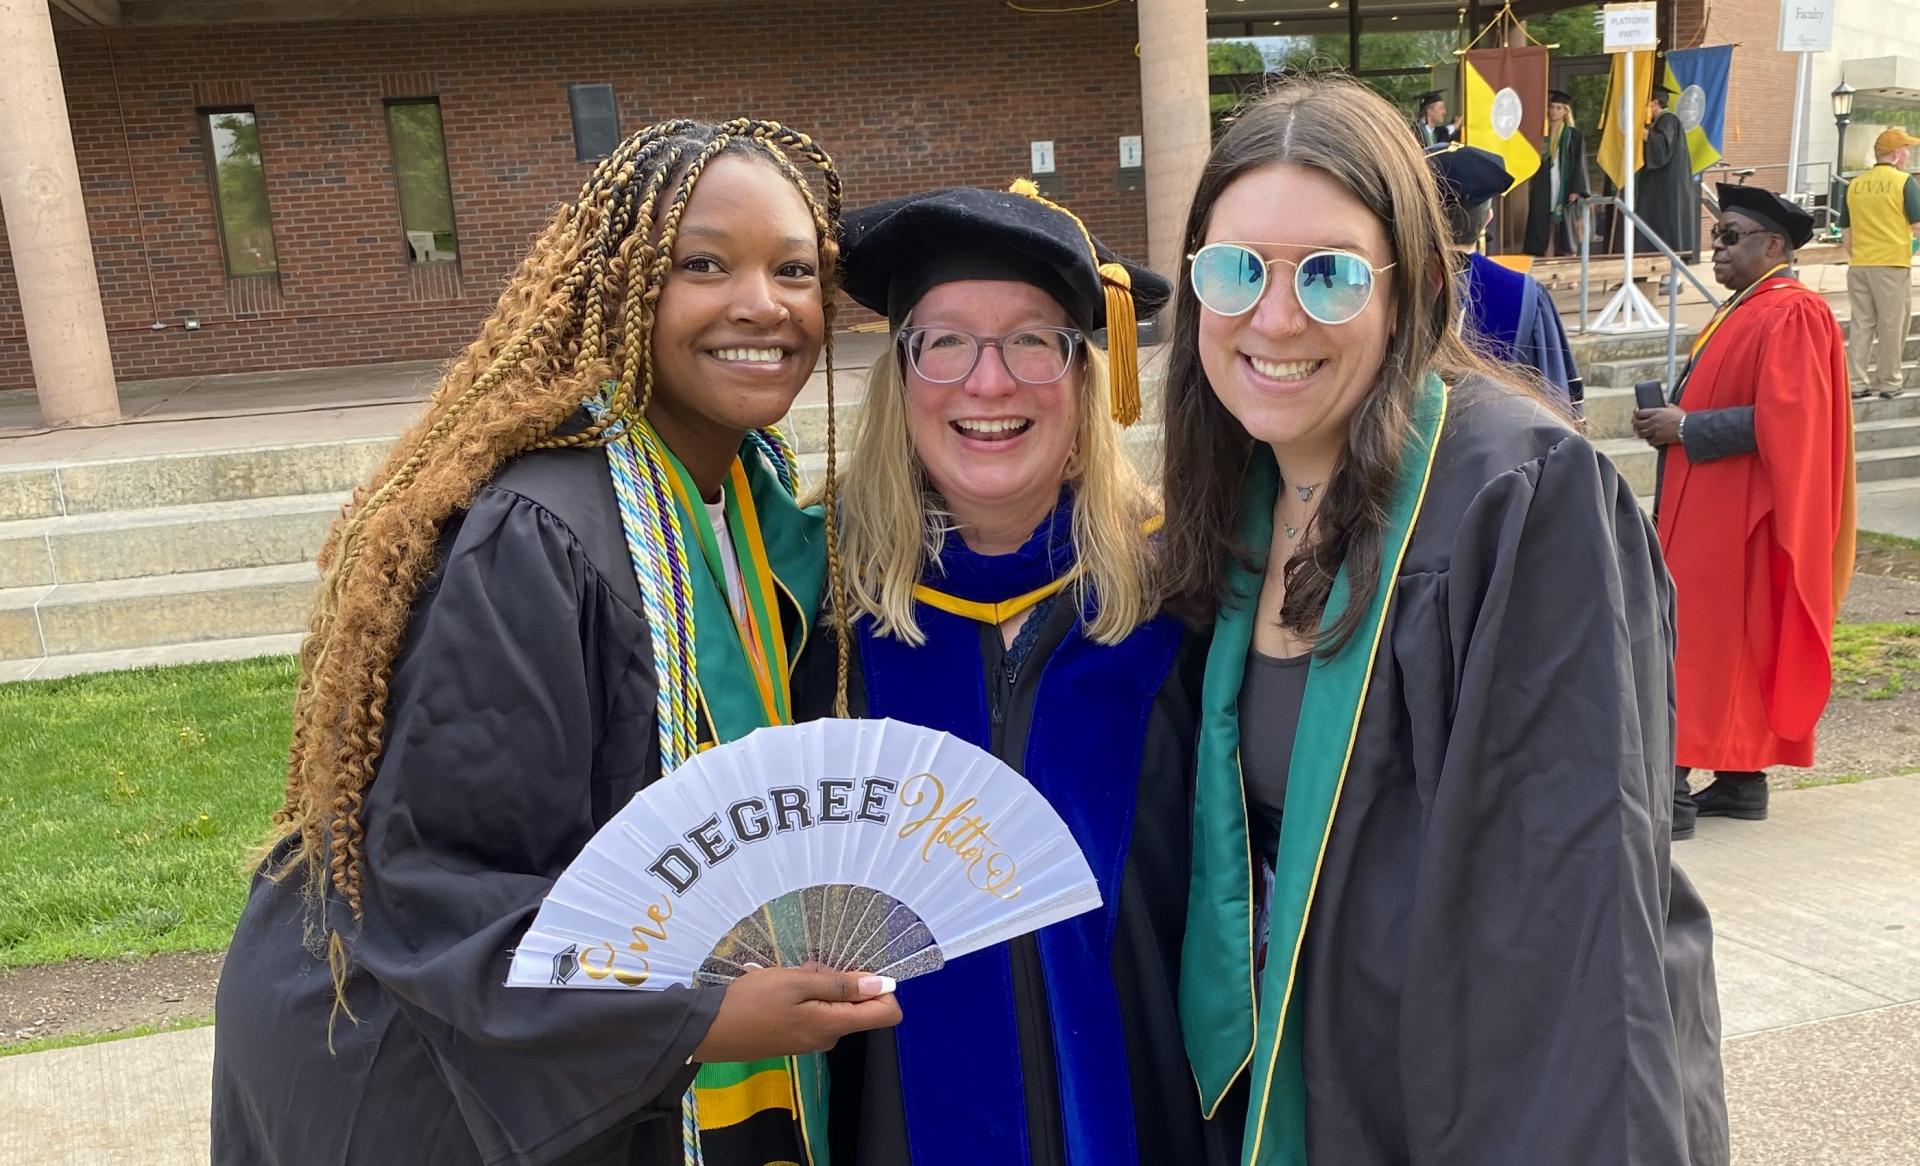 Sandra King, Professor Jen Hurley, and another student smiling before UVM Commencement.